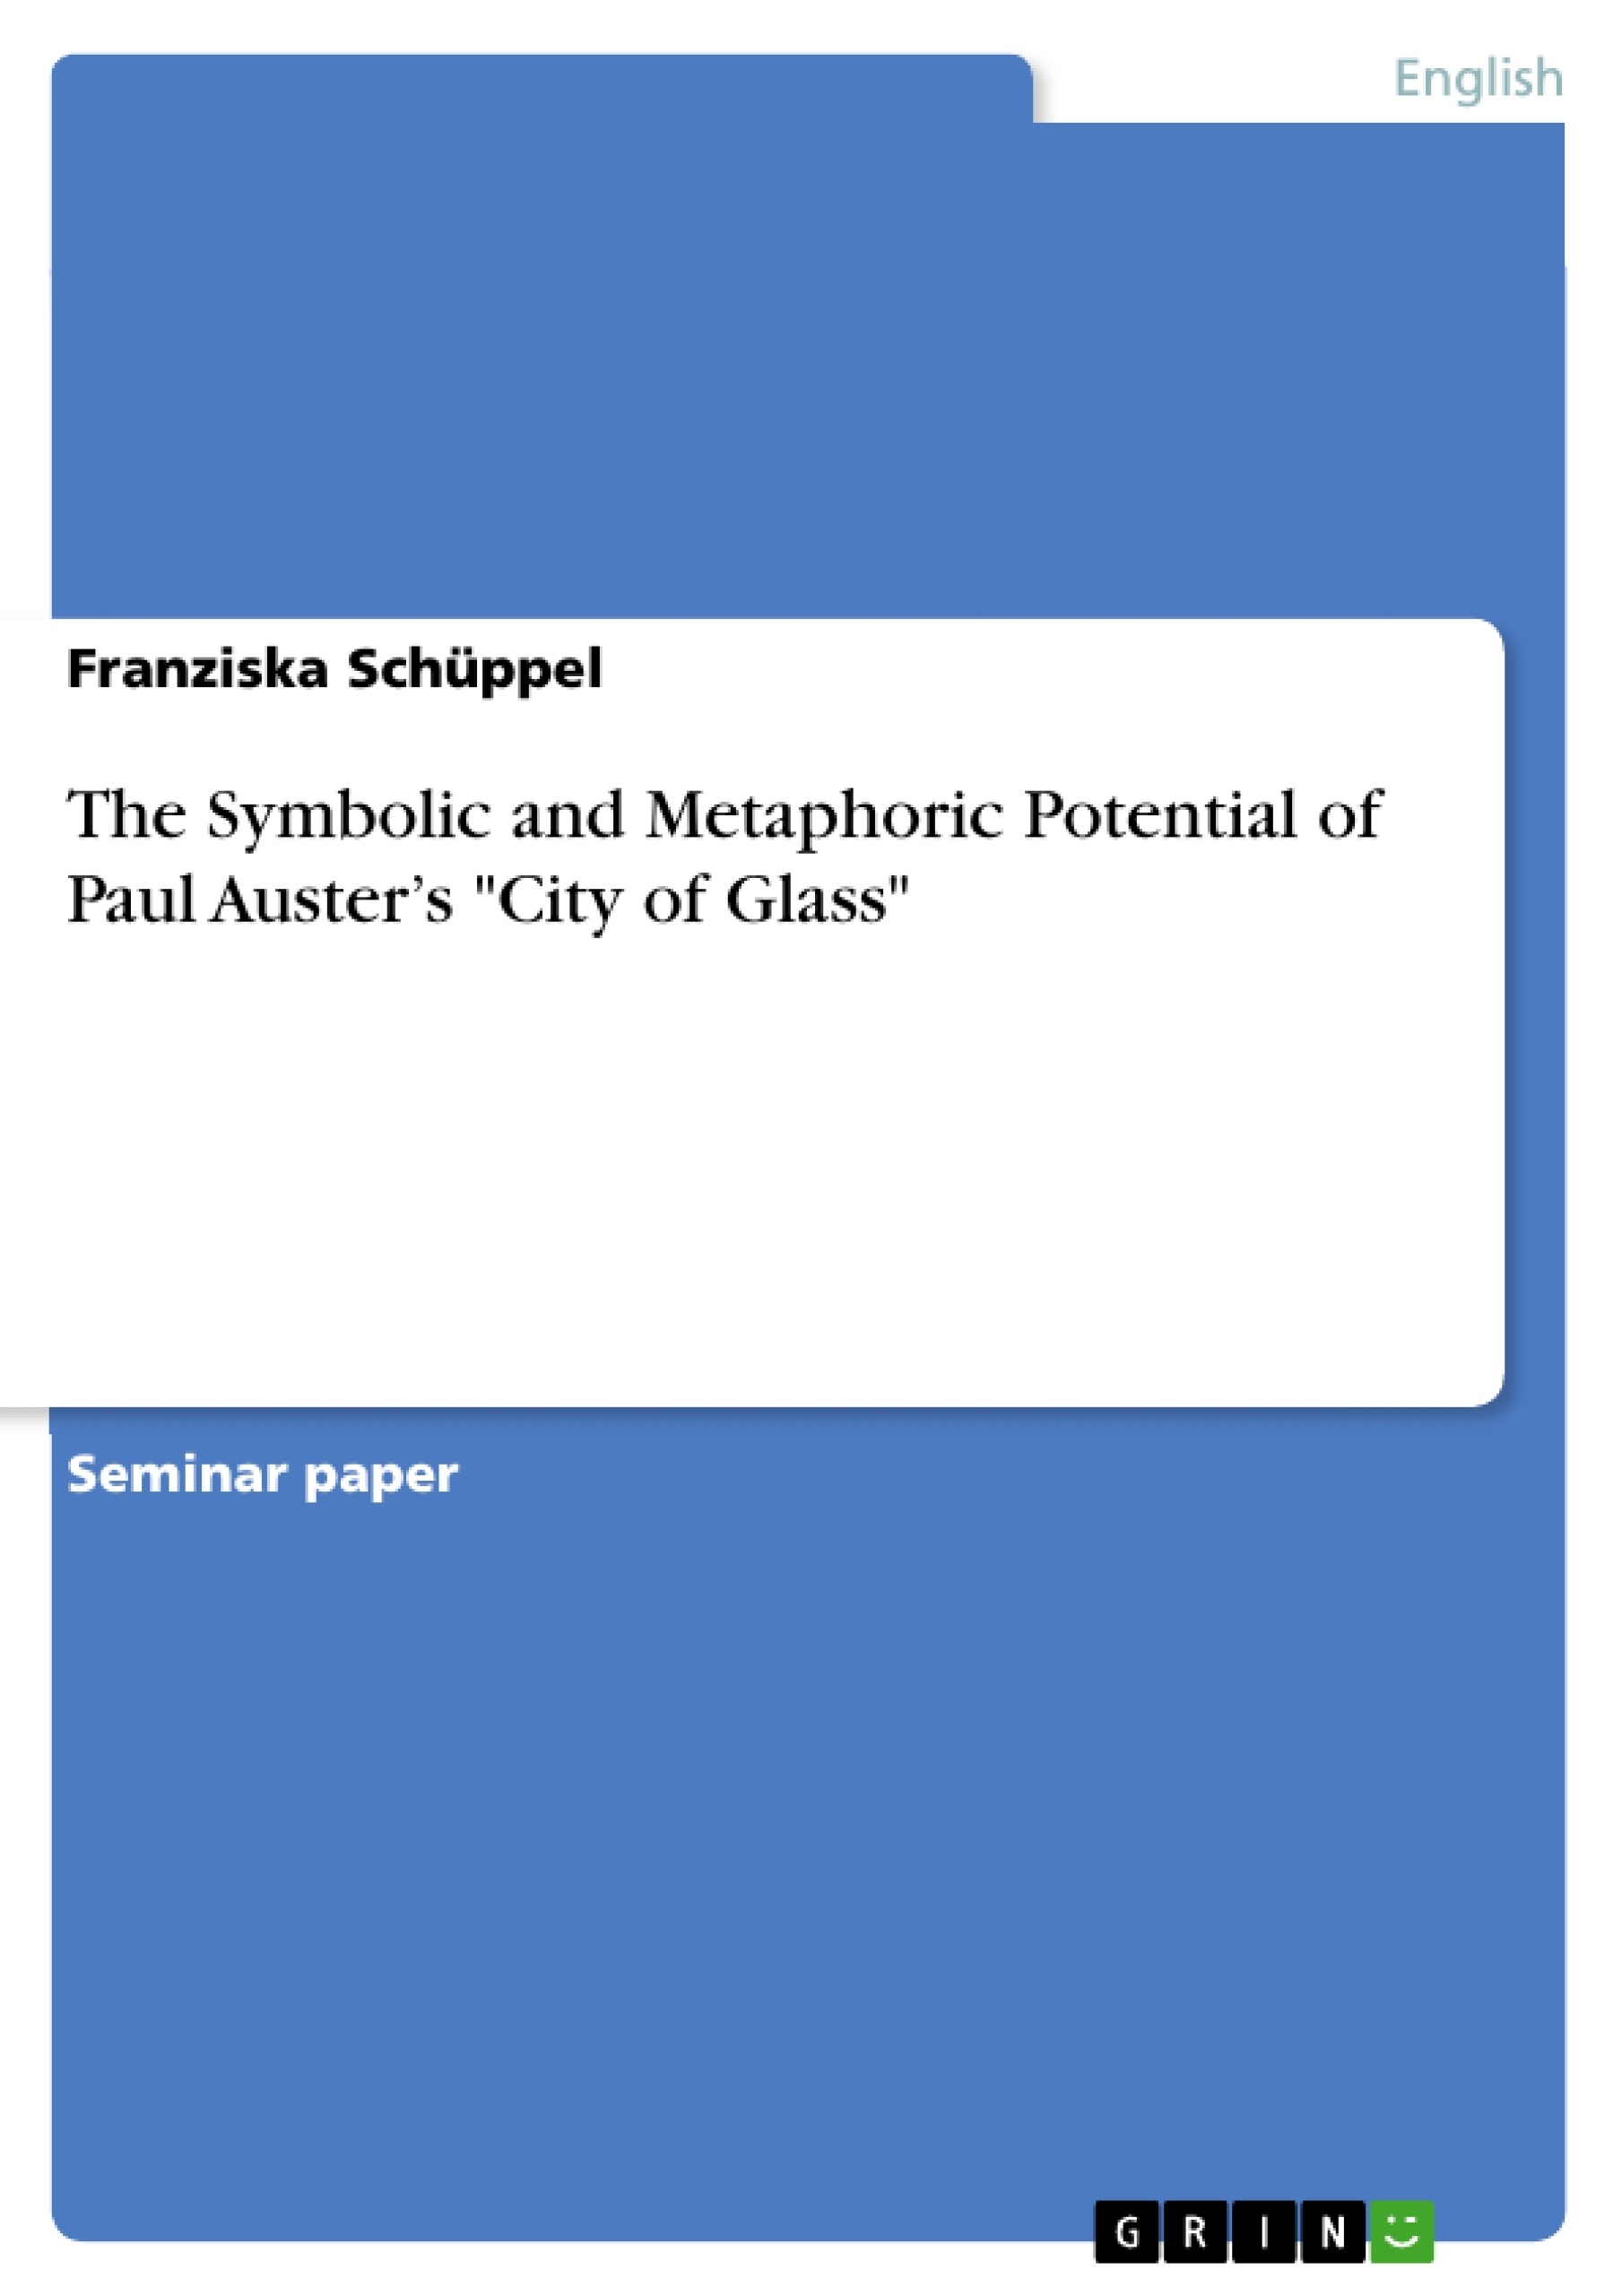 Title: The Symbolic and Metaphoric Potential of Paul Auster’s "City of Glass"